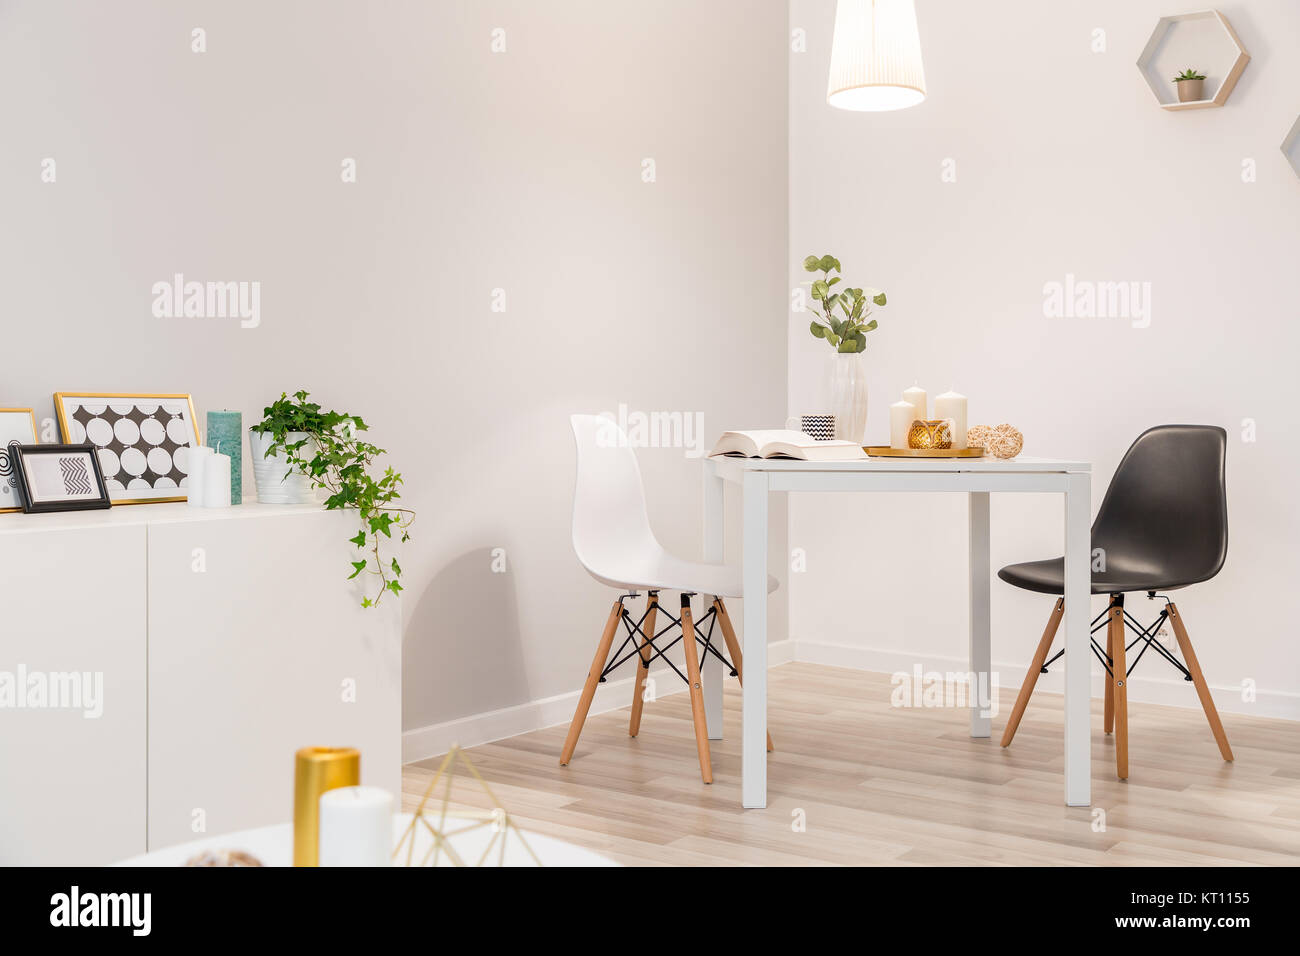 Dining area with two chairs and table in nordic style Stock Photo